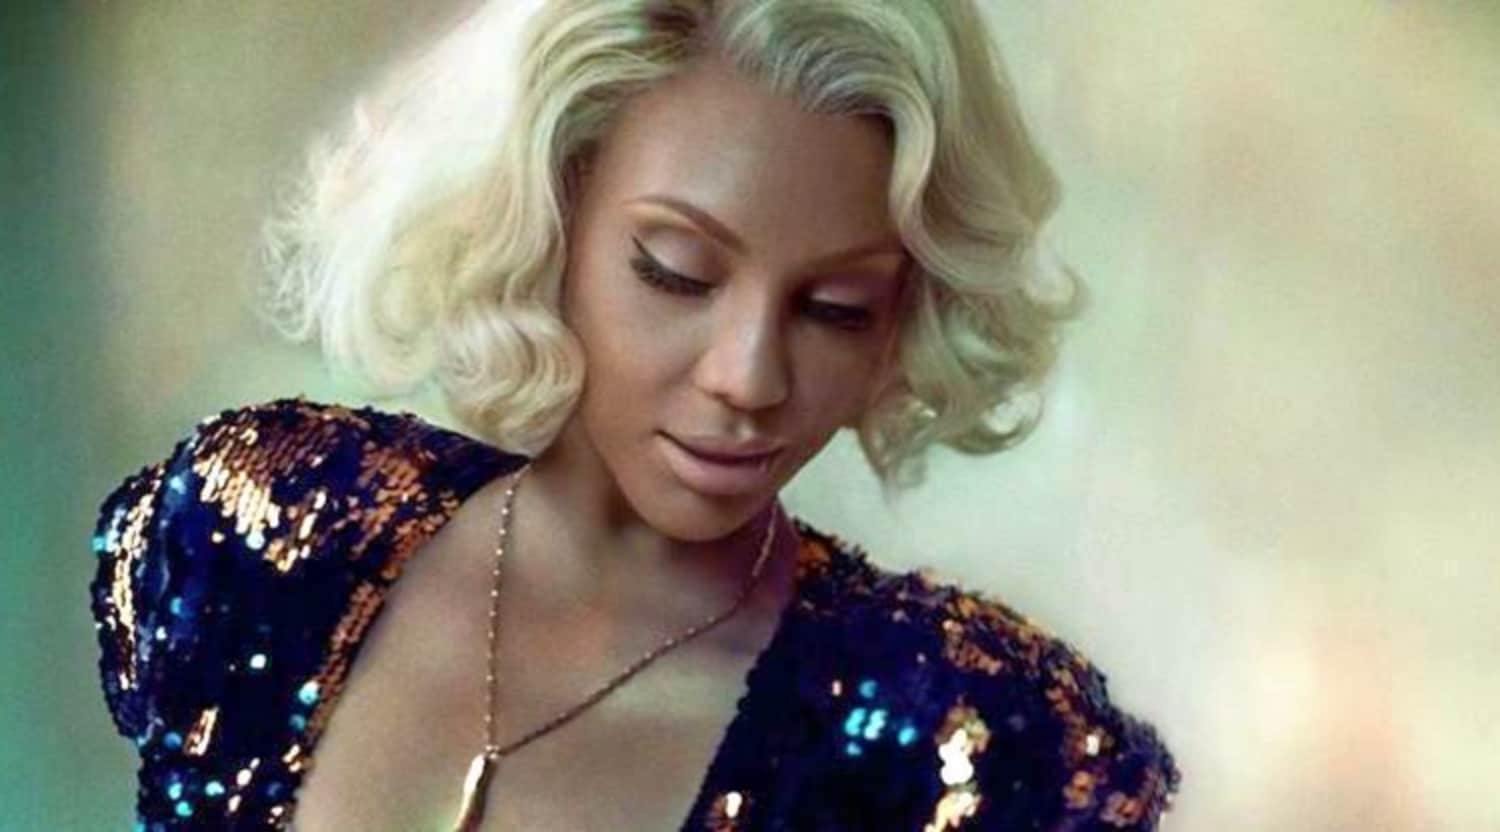 Tamar Braxton Surprises Fans And Shares An Instagram Post After Deleting Everything: 'Did You Miss Me?'